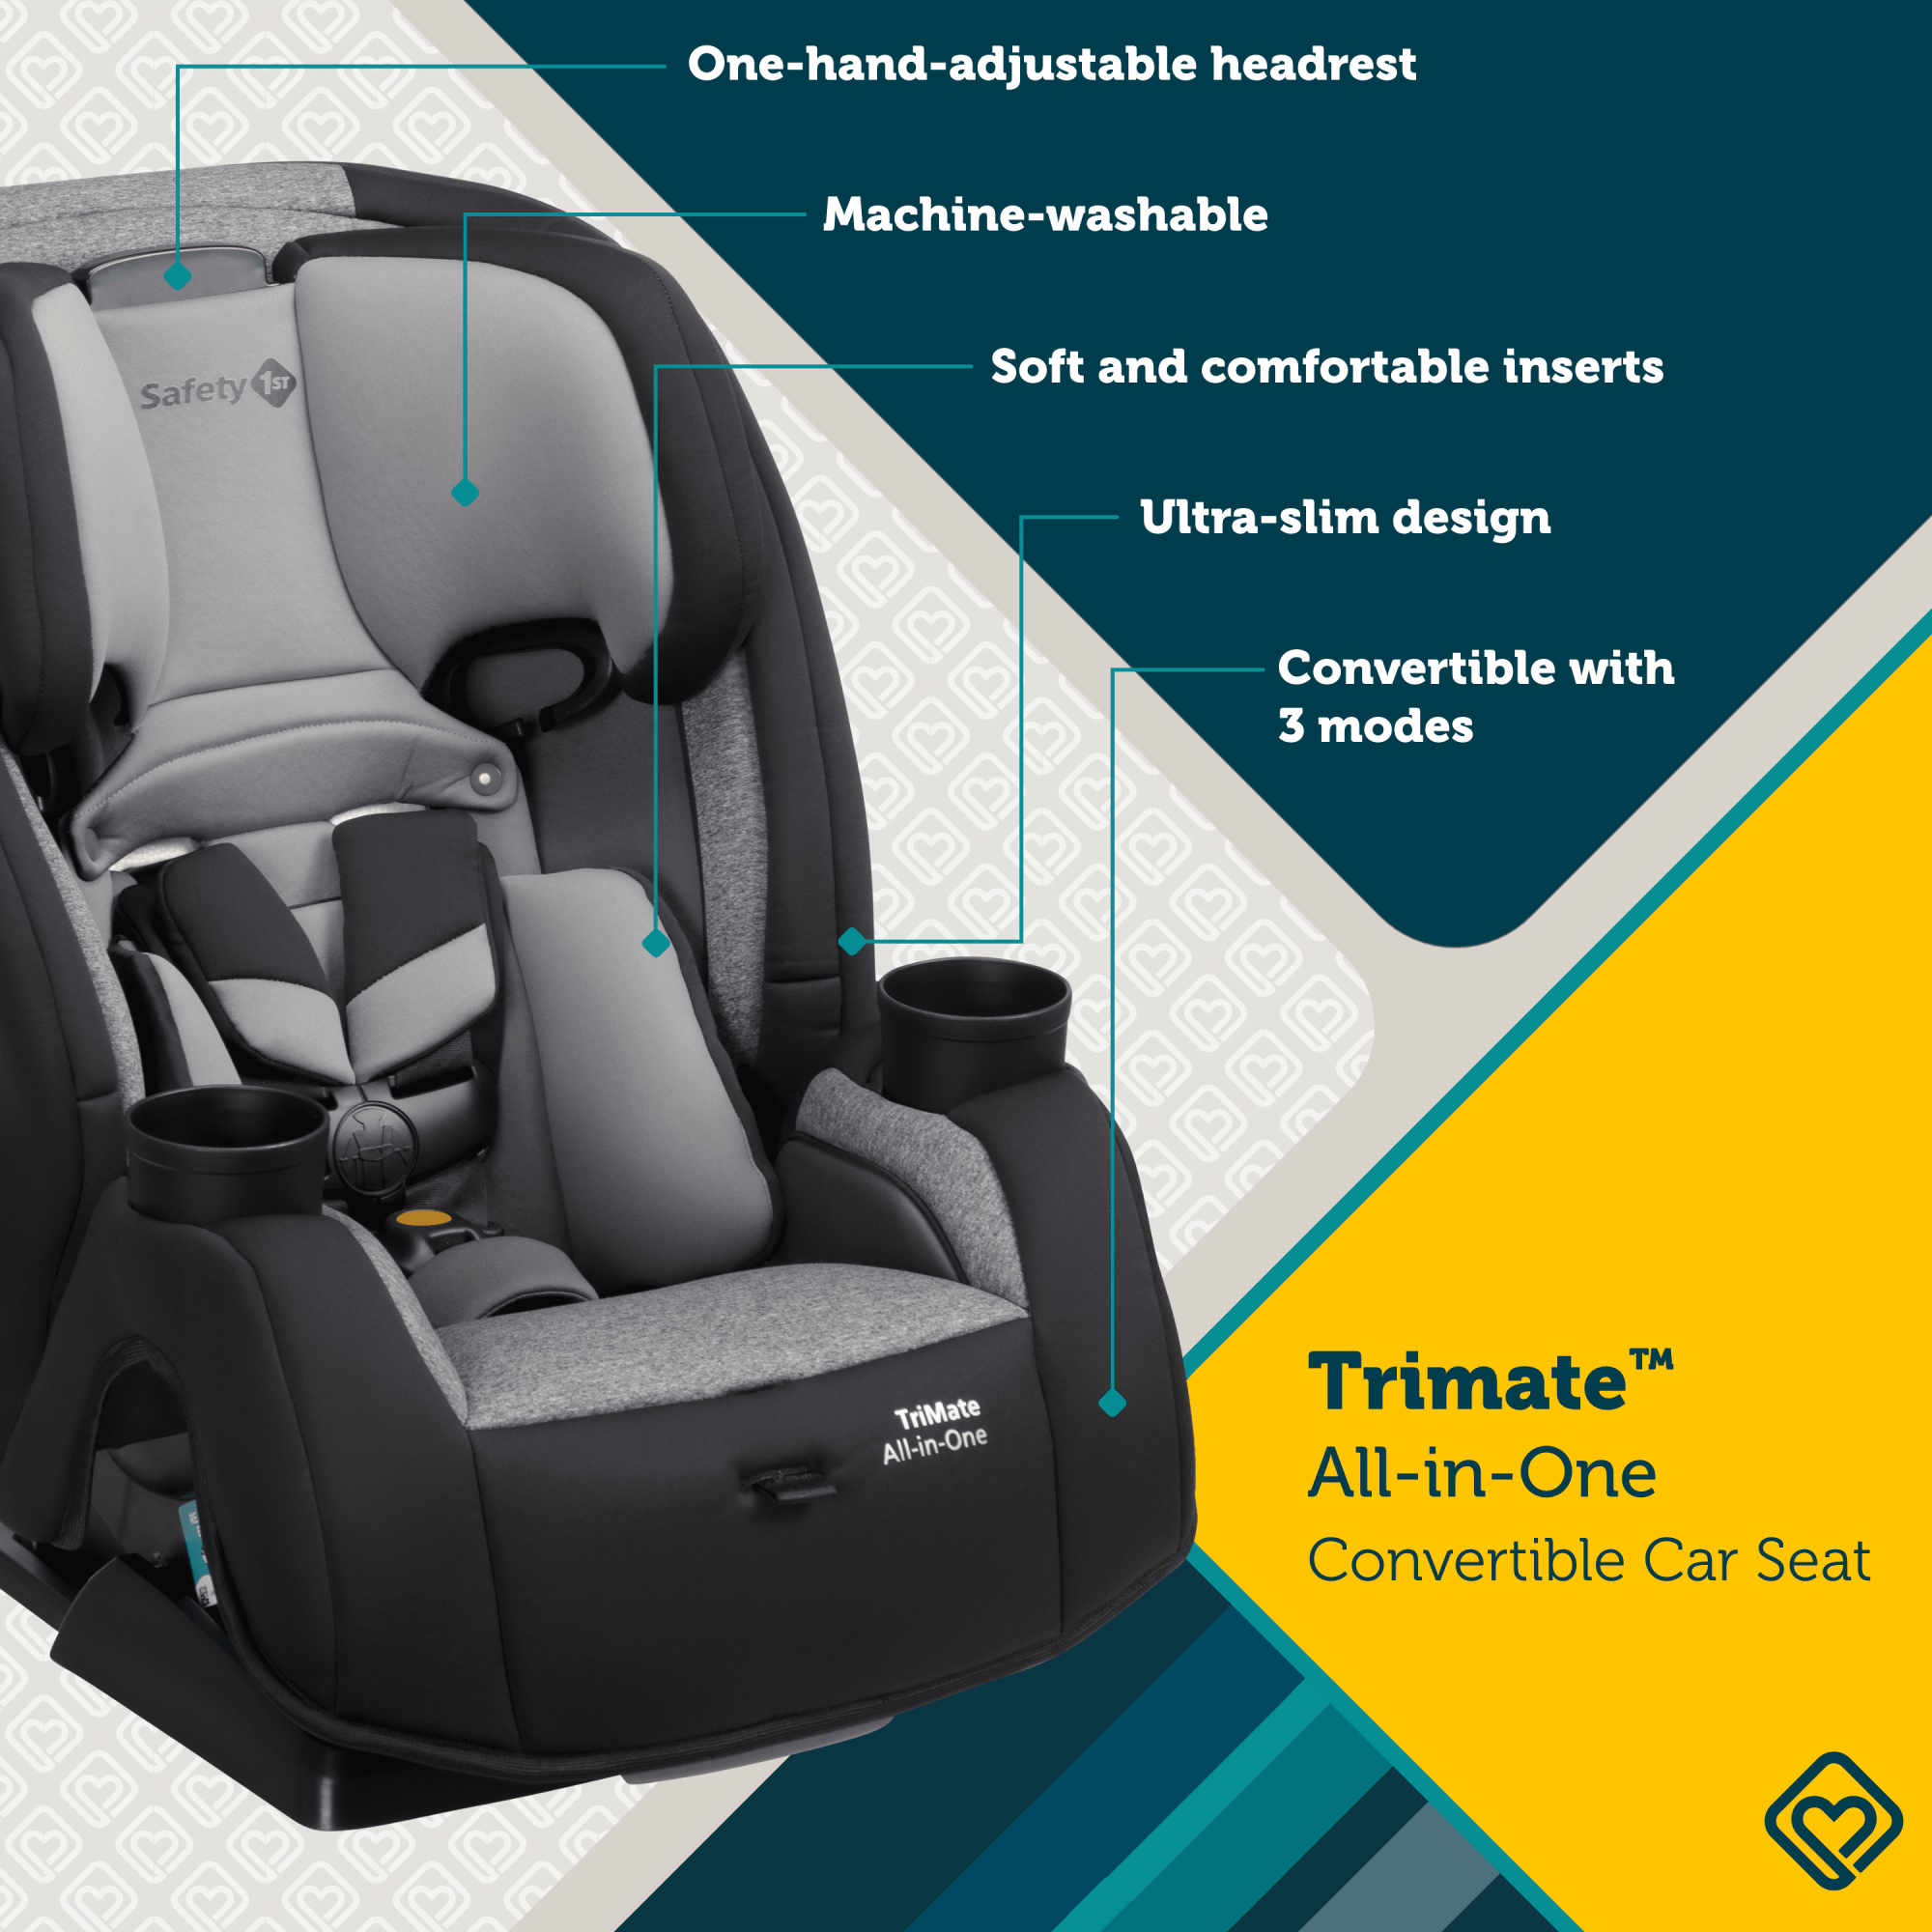 TriMate™ All-in-One Convertible Car Seat - ultra-slim design - just 17" across - fits 3 across the back seat